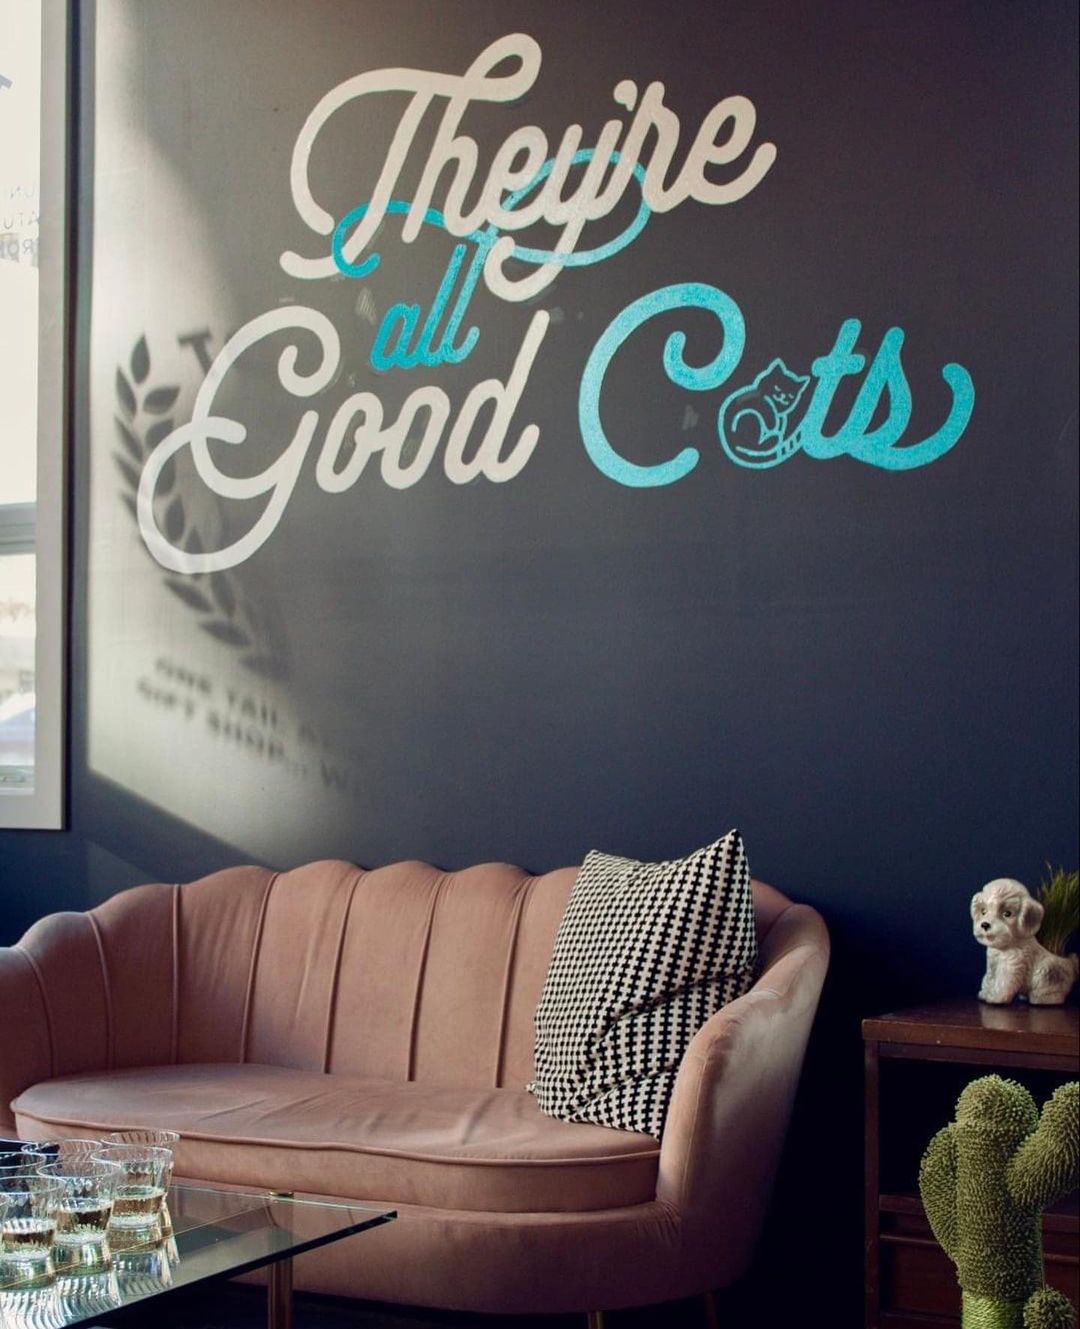 We’re over the moon to be opening @tortieandco - a unique gift boutique with free roaming adoptable OTAT cats helping you shop! 

The boutique features small businesses from around the world, local makers, and OTAT merchandise for sale. **100% of profits benefit OTAT's dog, cat, and rabbit rescue program.**

The shop is located at 1468 N. Ashland Ave in Chicago. Our Grand Opening is Black Friday at 11am! We are open to the public after that every Thursday-Sunday. No appointment needed- come in get your holiday gifts and meet adoptable OCATS!